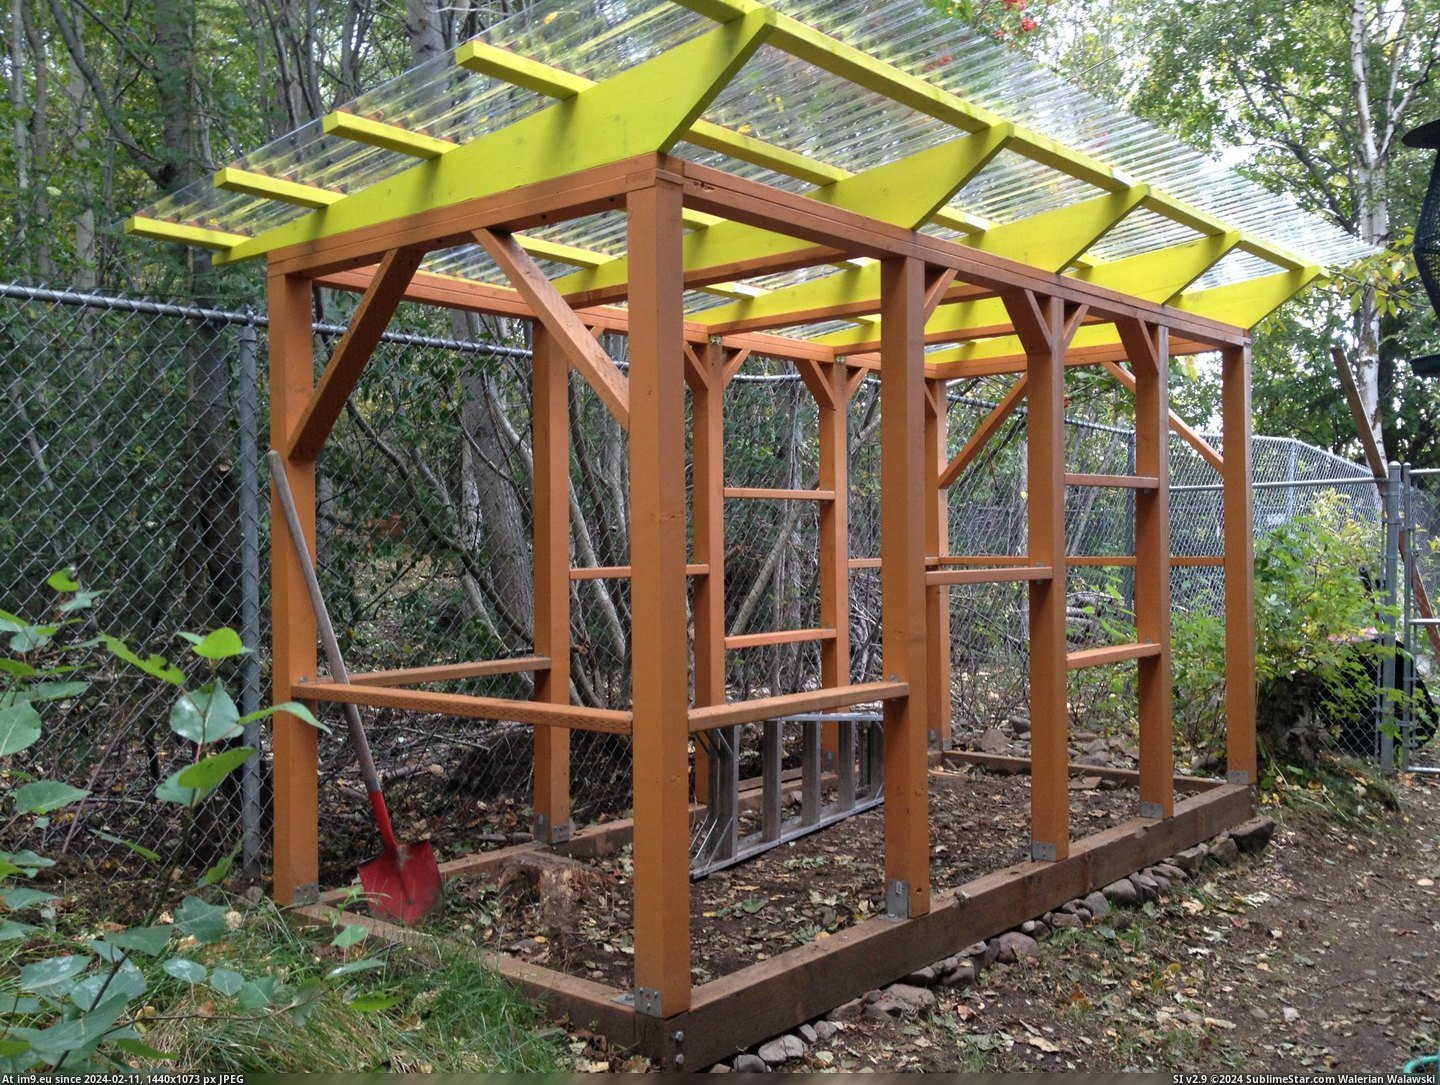 #Share #Thought #Chicken #Coop #Built #Alaska [Pics] I built a chicken coop at my home in Alaska and I thought I'd share 1 Pic. (Image of album My r/PICS favs))